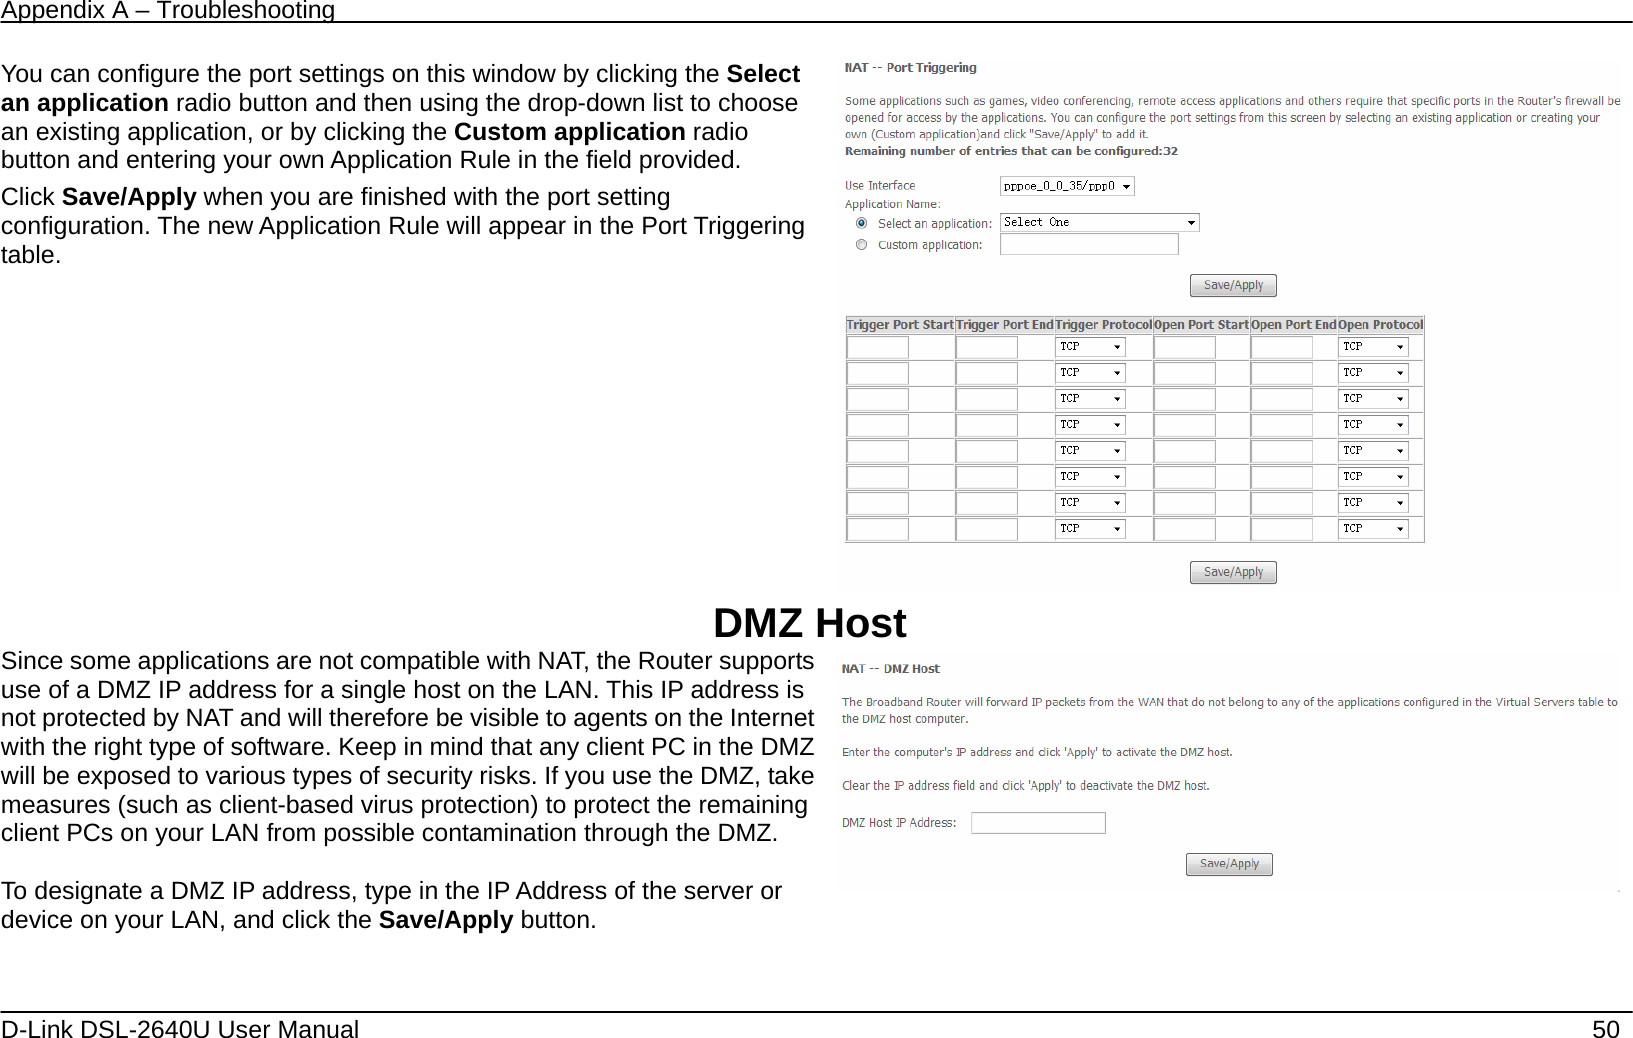 Appendix A – Troubleshooting   D-Link DSL-2640U User Manual    50 You can configure the port settings on this window by clicking the Select an application radio button and then using the drop-down list to choose an existing application, or by clicking the Custom application radio button and entering your own Application Rule in the field provided.   Click Save/Apply when you are finished with the port setting configuration. The new Application Rule will appear in the Port Triggering table.   DMZ Host Since some applications are not compatible with NAT, the Router supports use of a DMZ IP address for a single host on the LAN. This IP address is not protected by NAT and will therefore be visible to agents on the Internet with the right type of software. Keep in mind that any client PC in the DMZ will be exposed to various types of security risks. If you use the DMZ, take measures (such as client-based virus protection) to protect the remaining client PCs on your LAN from possible contamination through the DMZ.  To designate a DMZ IP address, type in the IP Address of the server or device on your LAN, and click the Save/Apply button.   